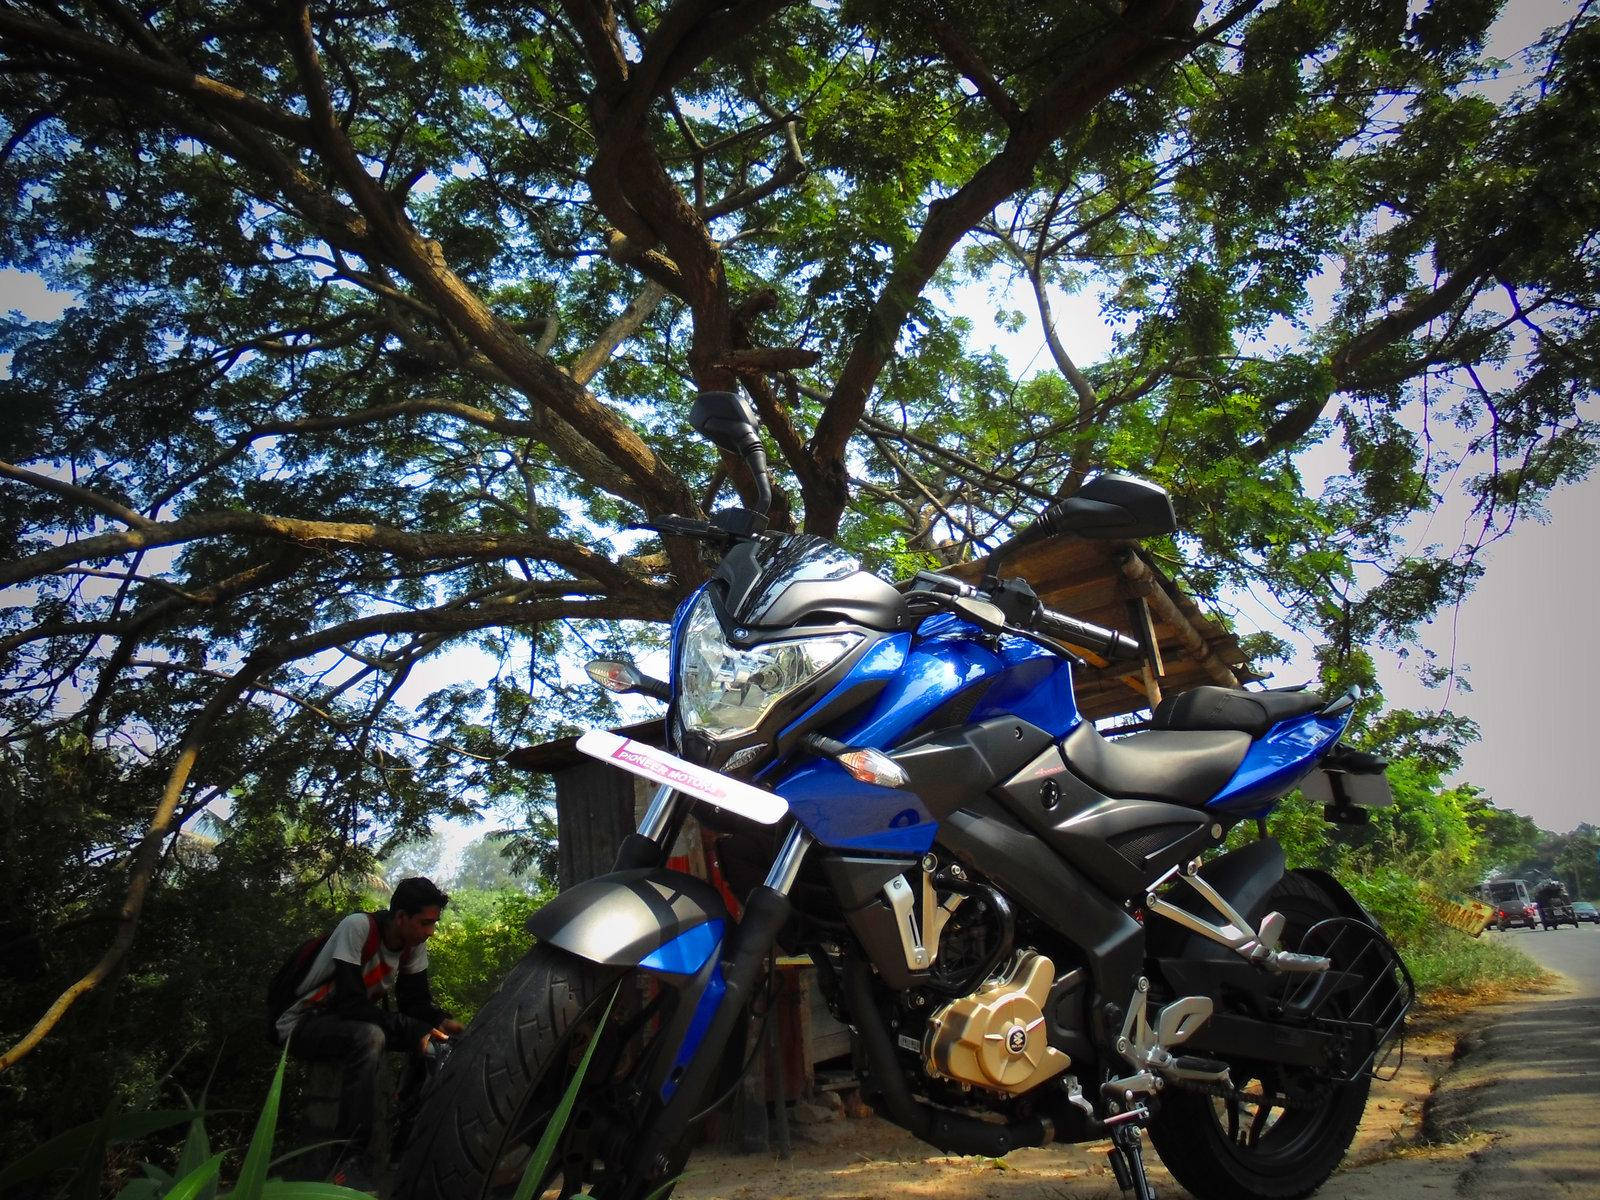 Ns 200 Motorcycle Under Tree Background